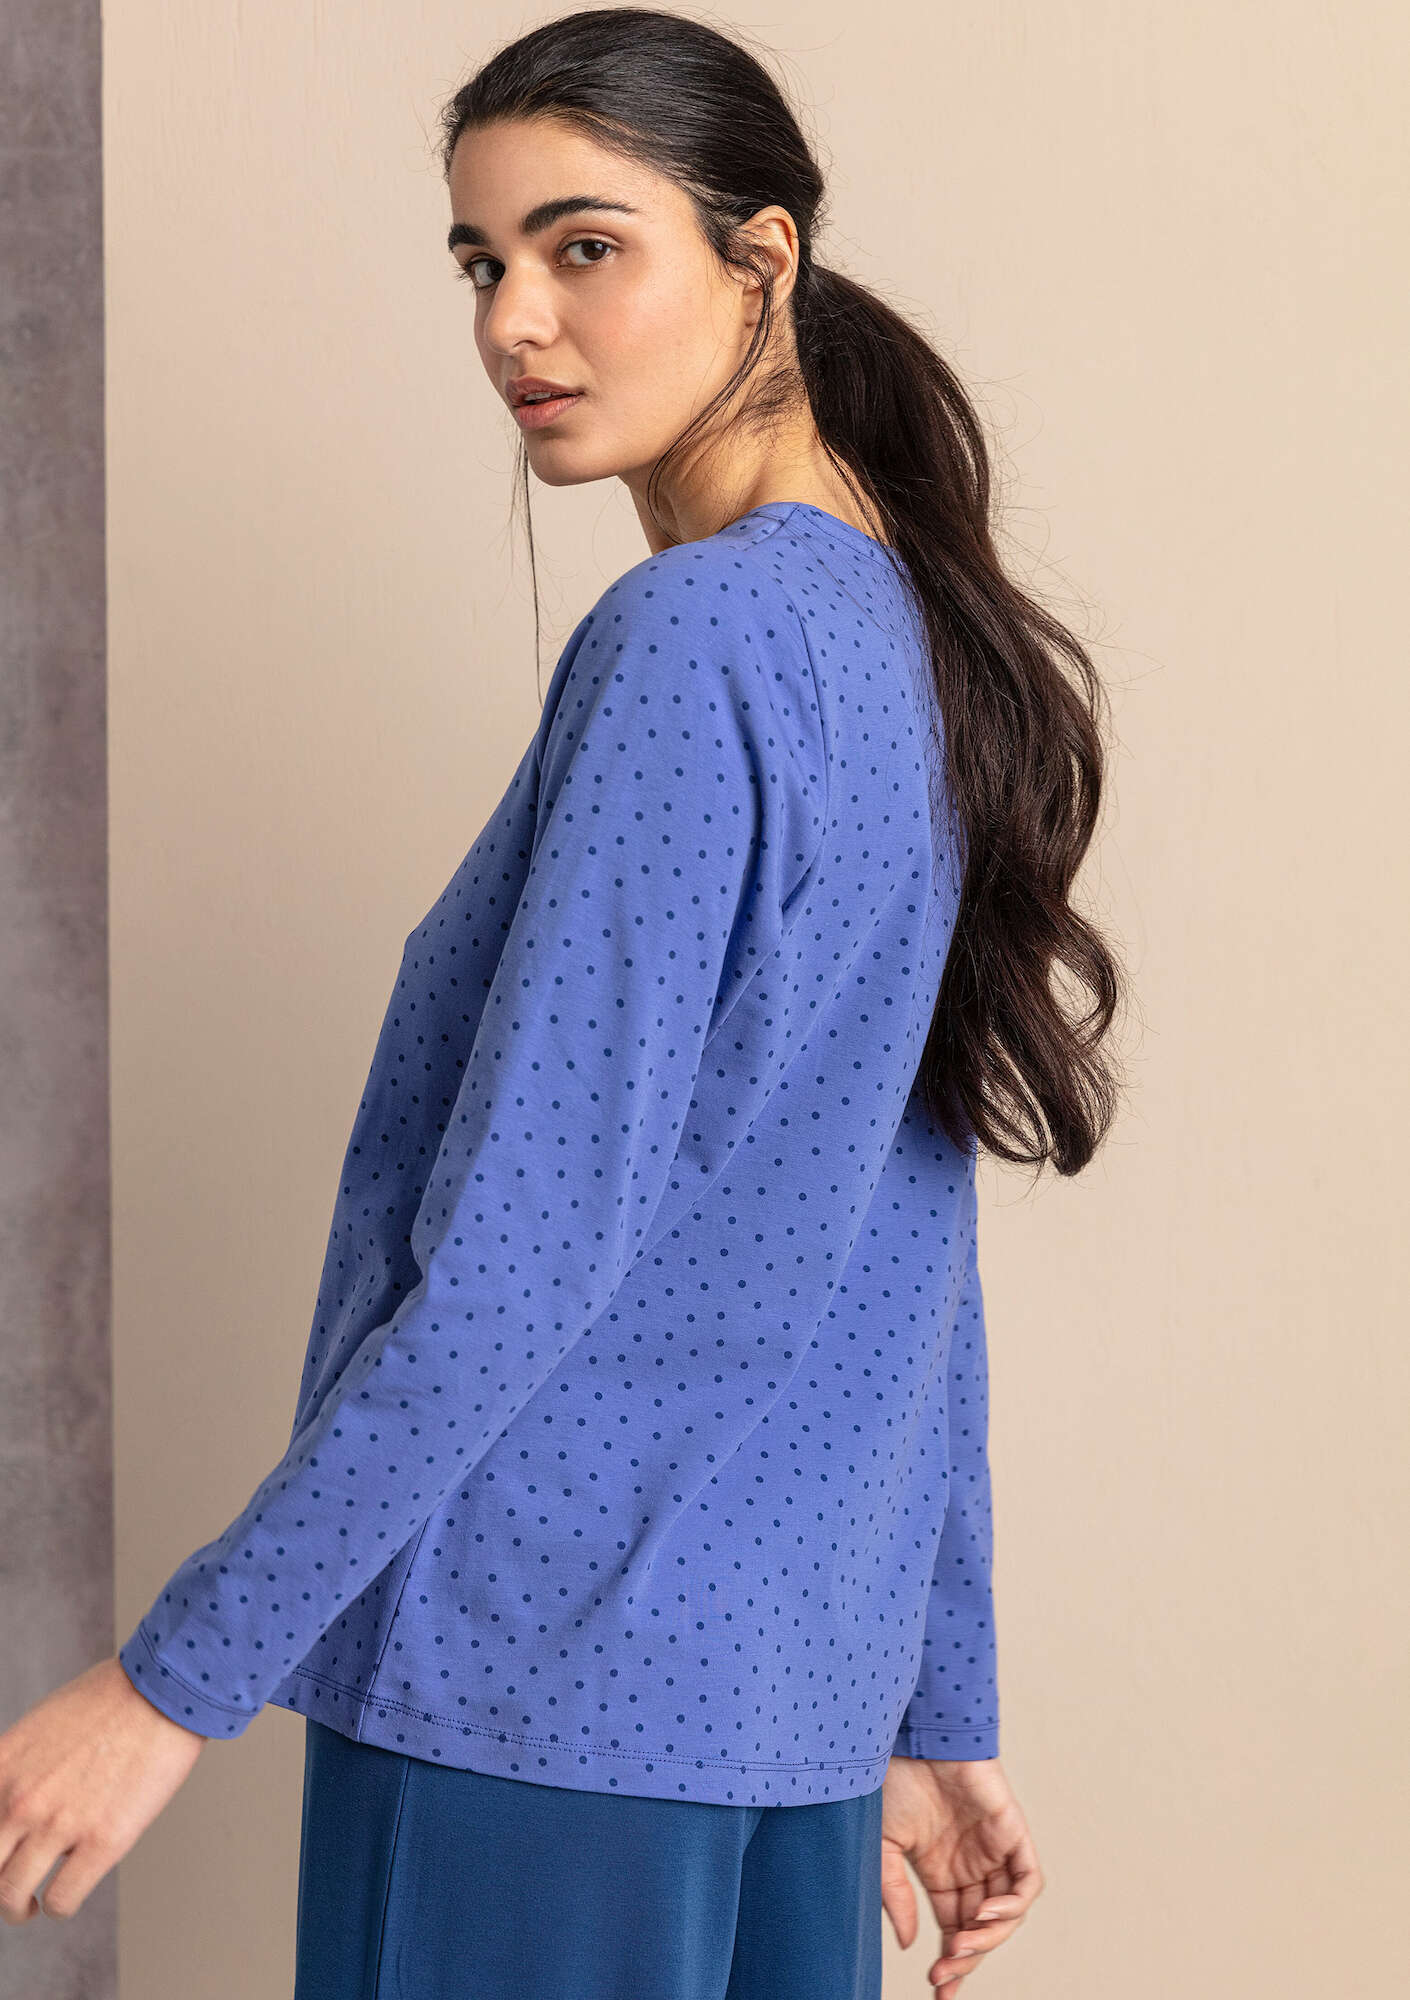 “Pytte” jersey top in organic cotton/spandex sky blue/patterned thumbnail